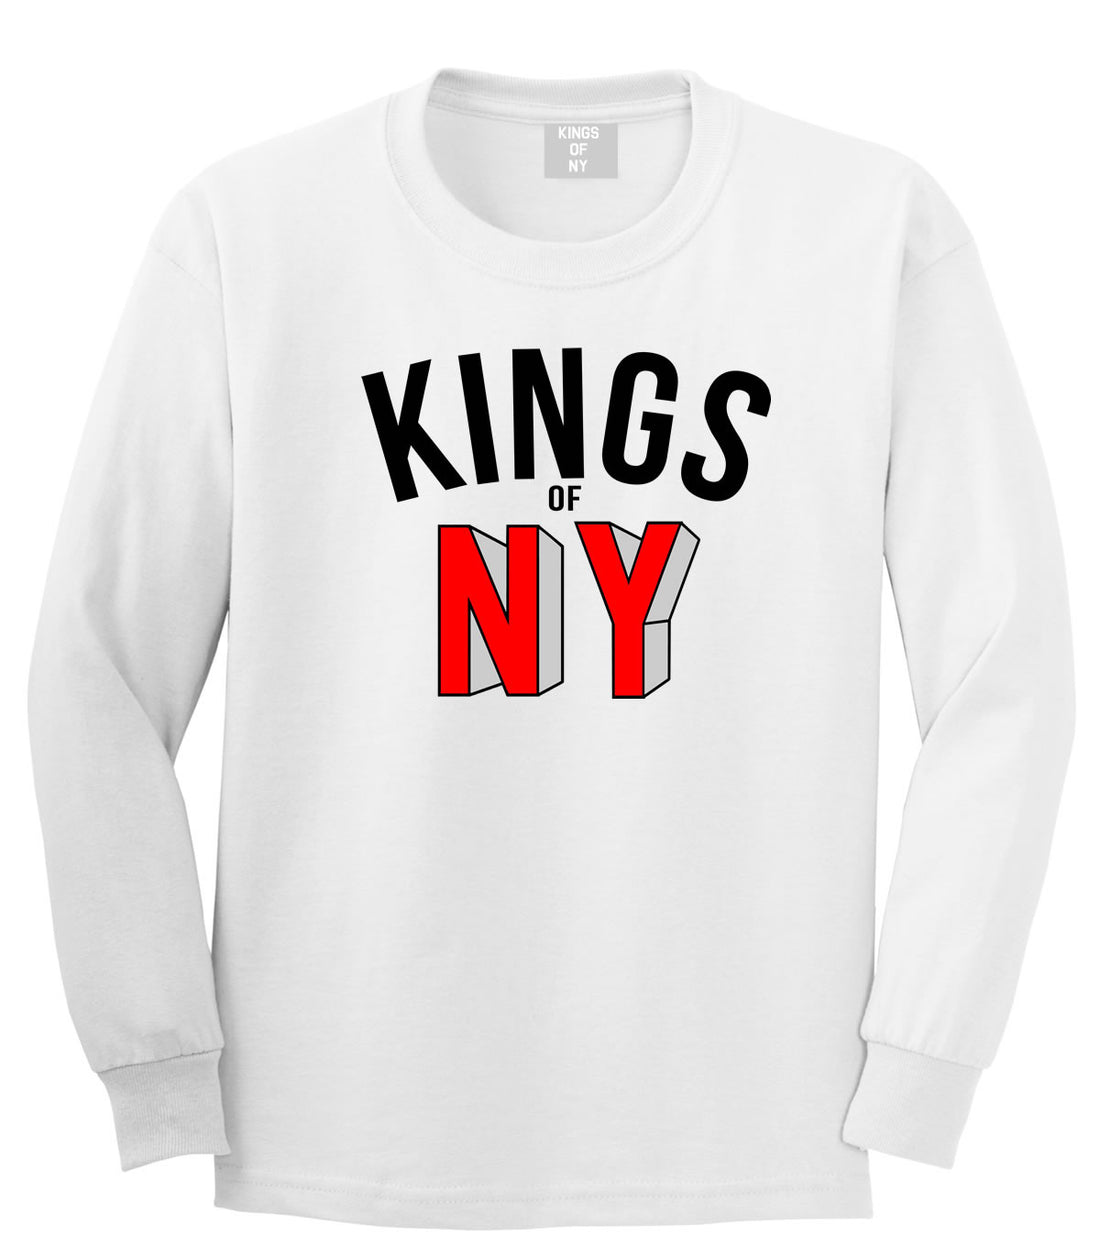 NY Red Block Letter Printed Boys Kids Long Sleeve T-Shirt in White by Kings Of NY